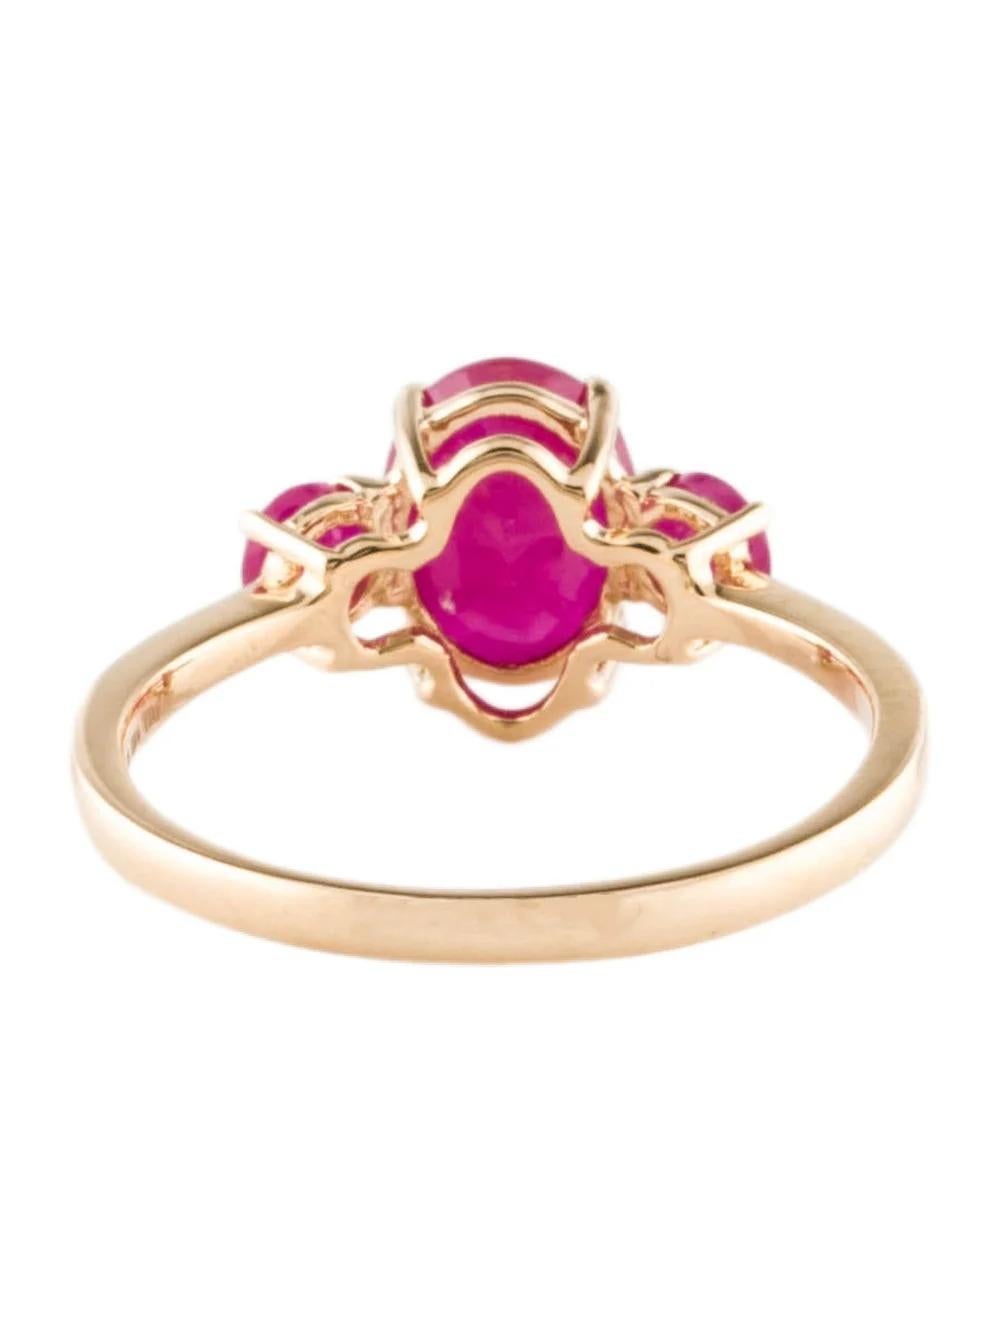 14K Yellow Gold 1.31ct Ruby Cocktail Ring, Size 6.75: Timeless Elegance In New Condition For Sale In Holtsville, NY